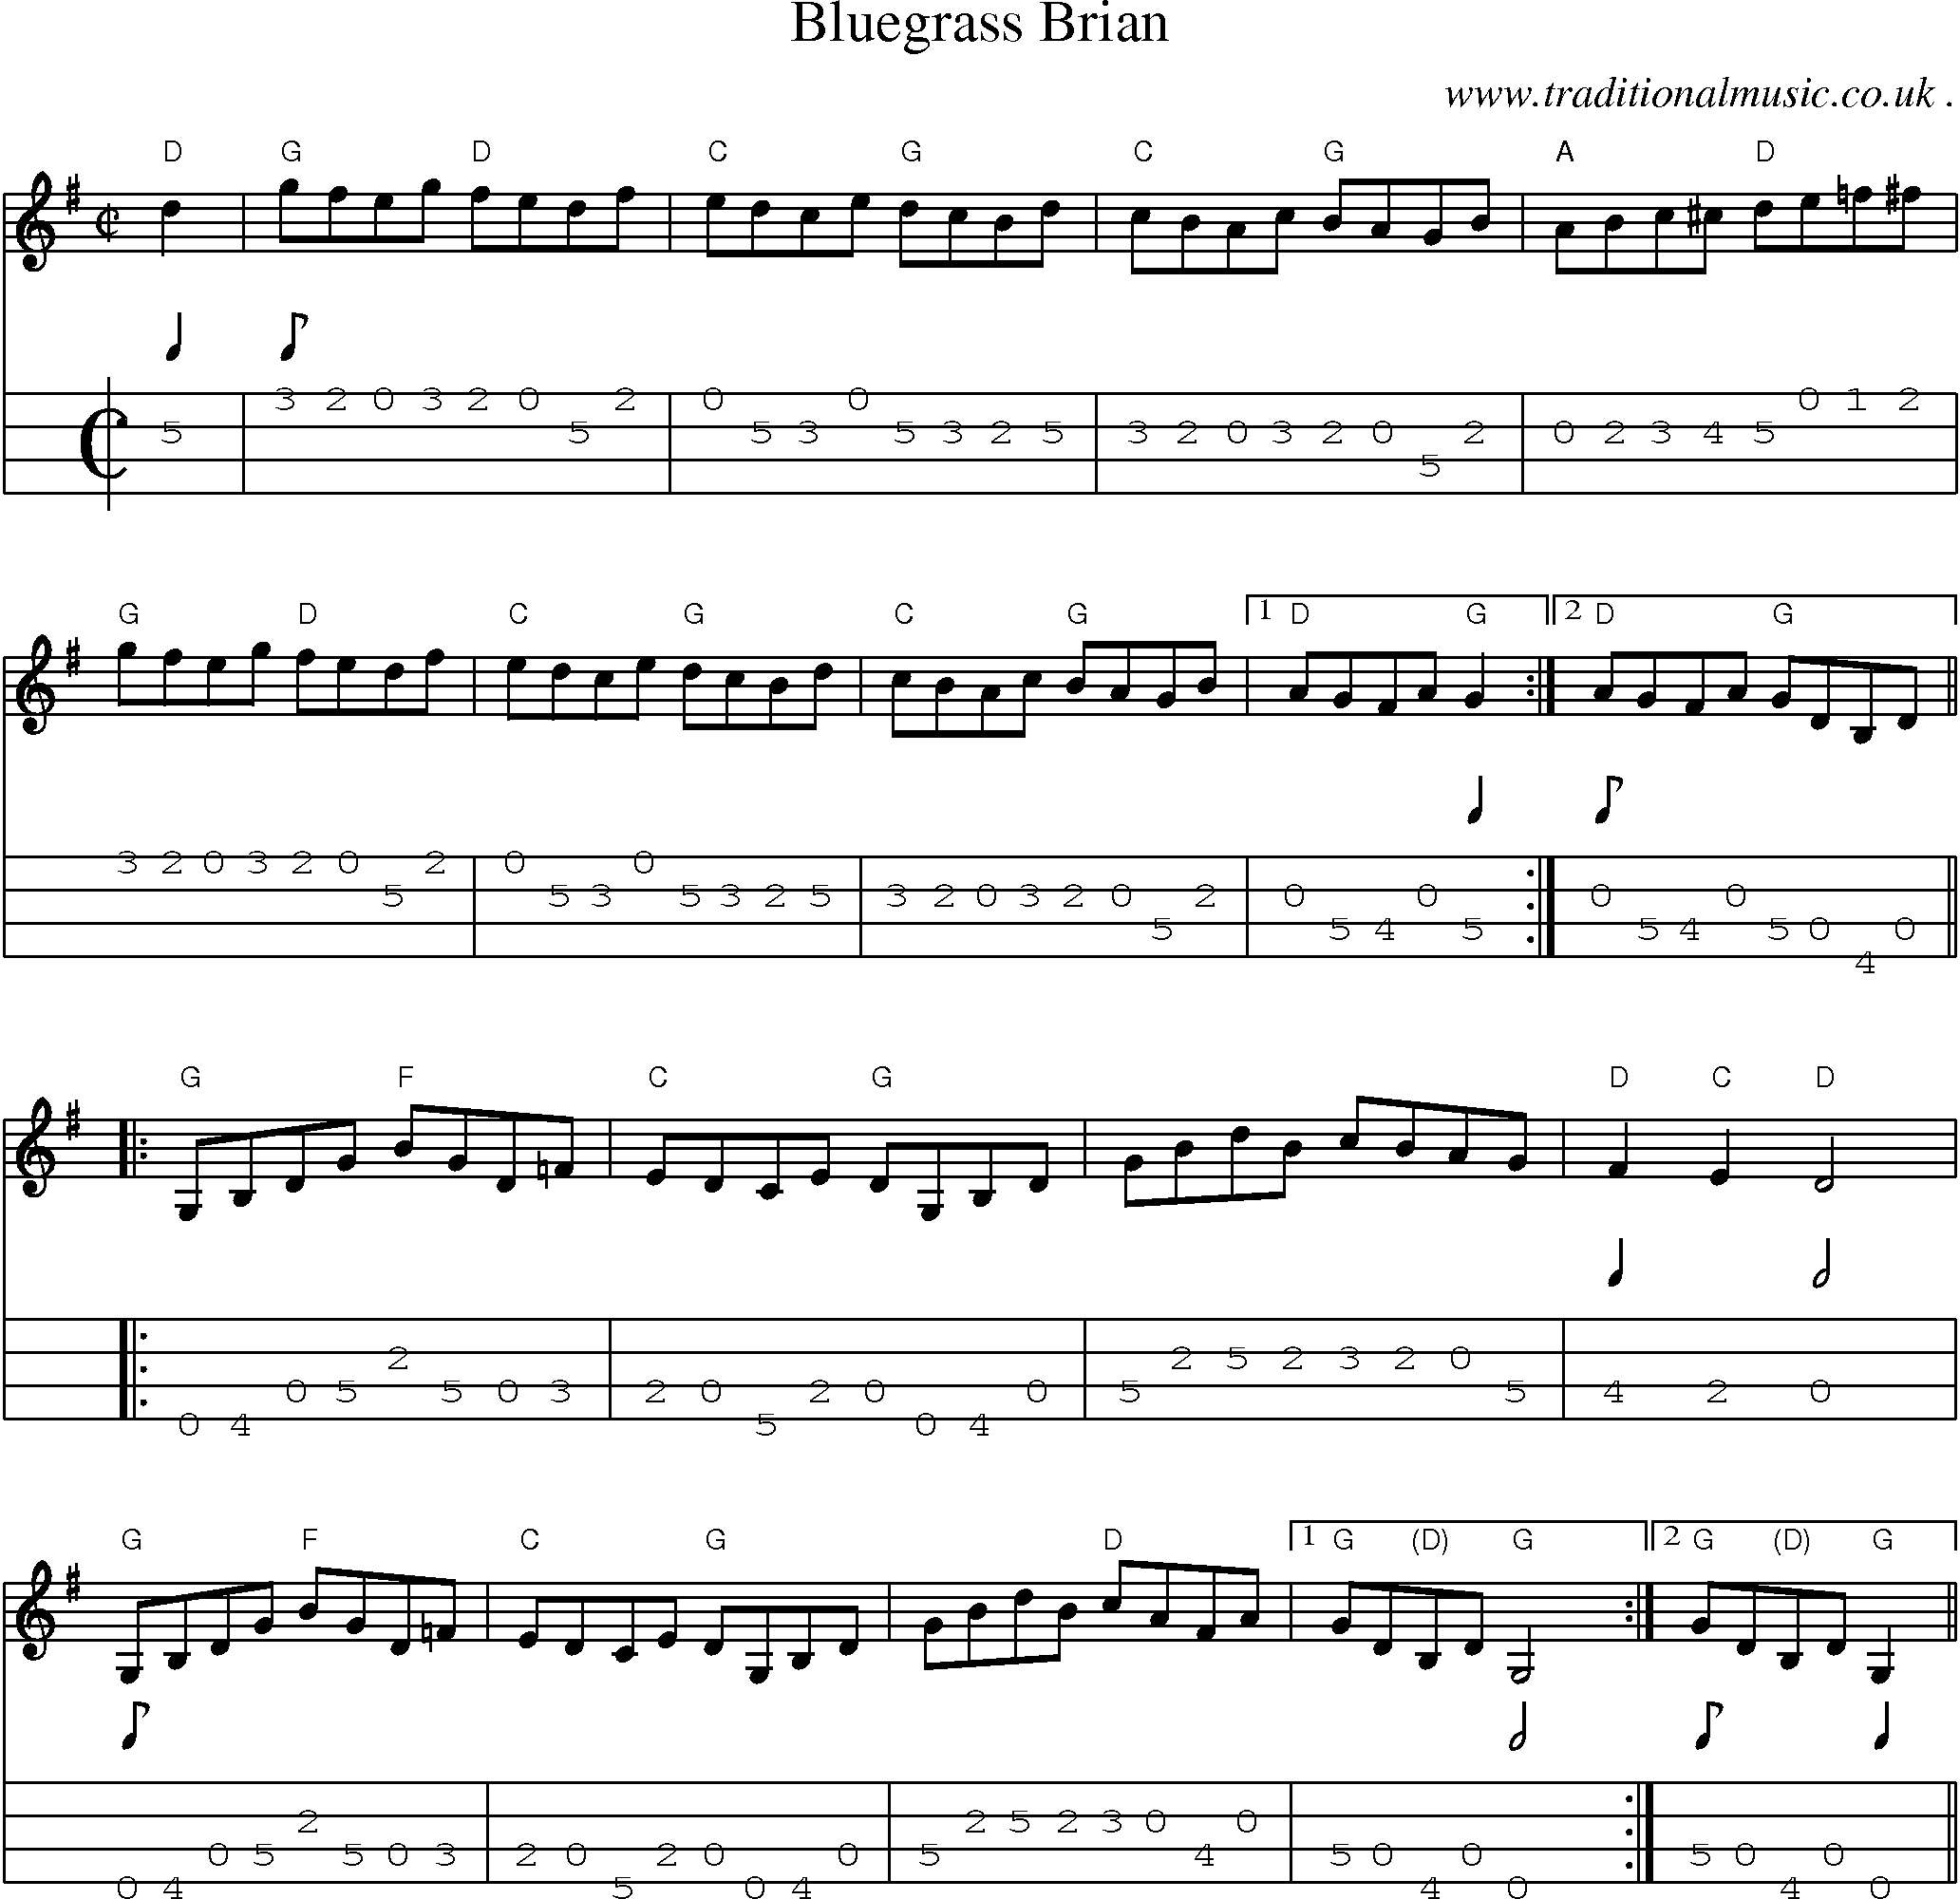 Music Score and Guitar Tabs for Bluegrass Brian